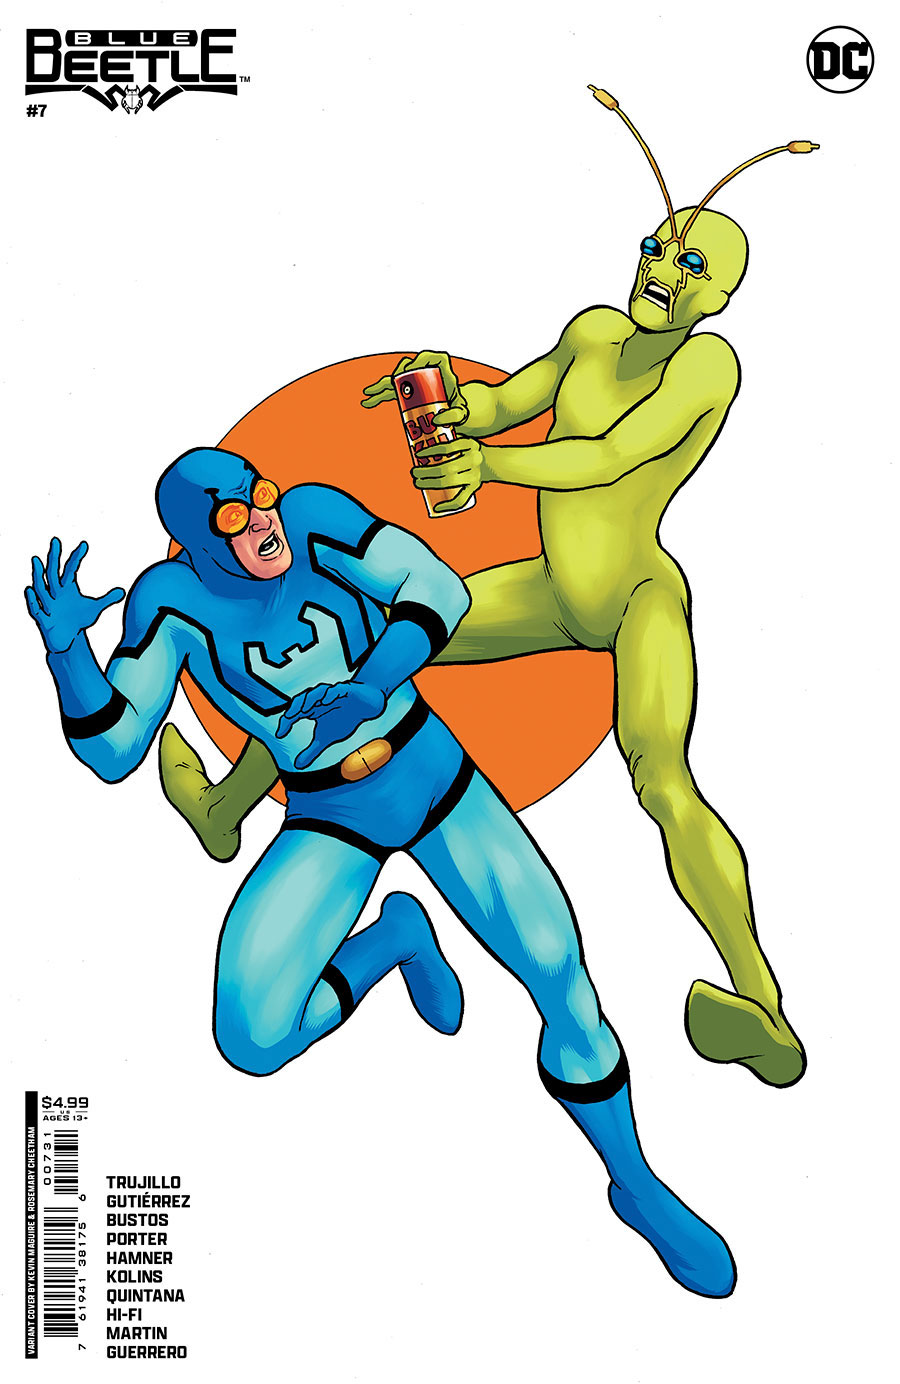 Blue Beetle (DC) Vol 5 #7 Cover B Variant Kevin Maguire Card Stock Cover